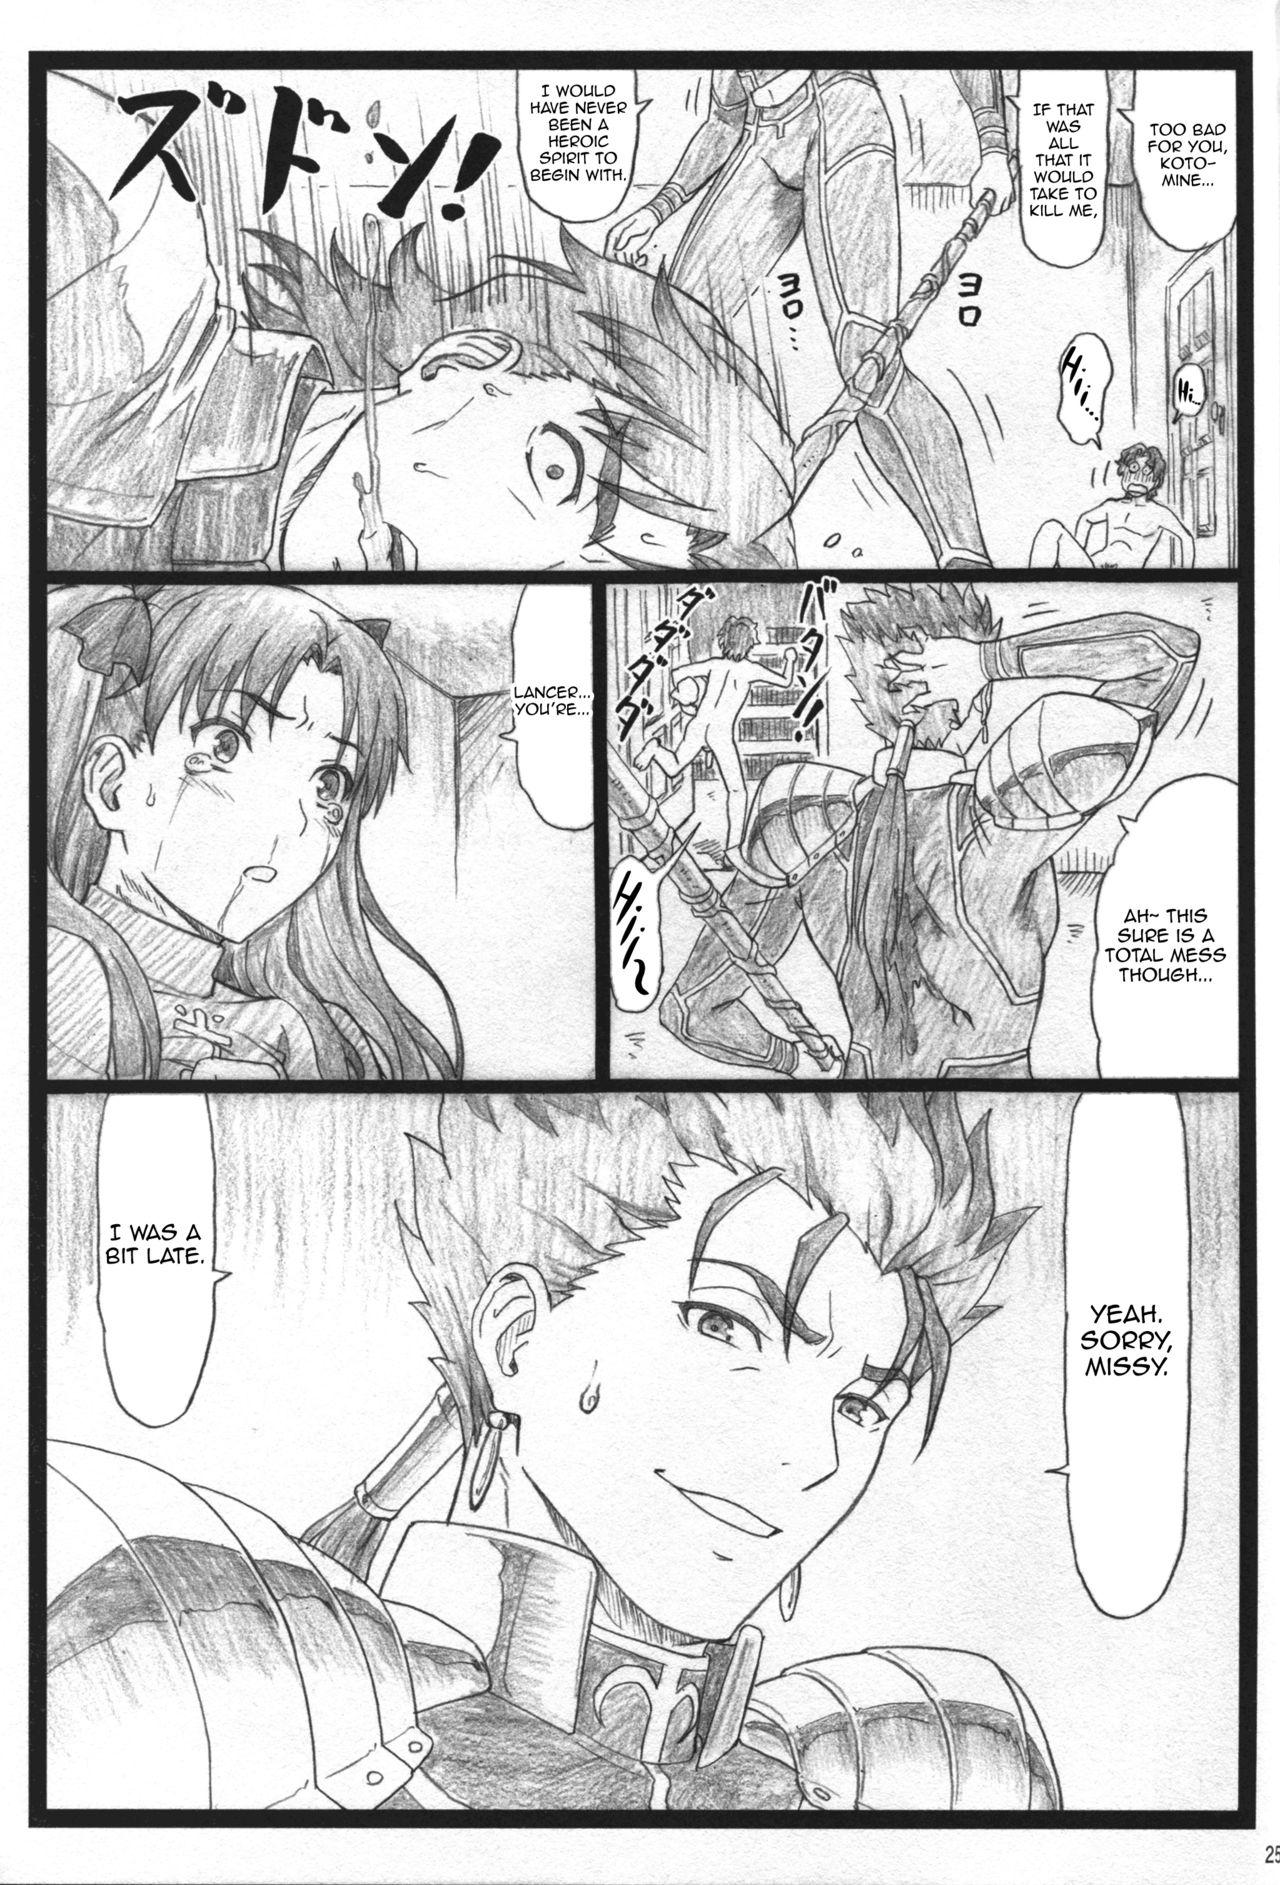 Flagra Rin to Shite... | With Rin... - Fate stay night Amiga - Page 25